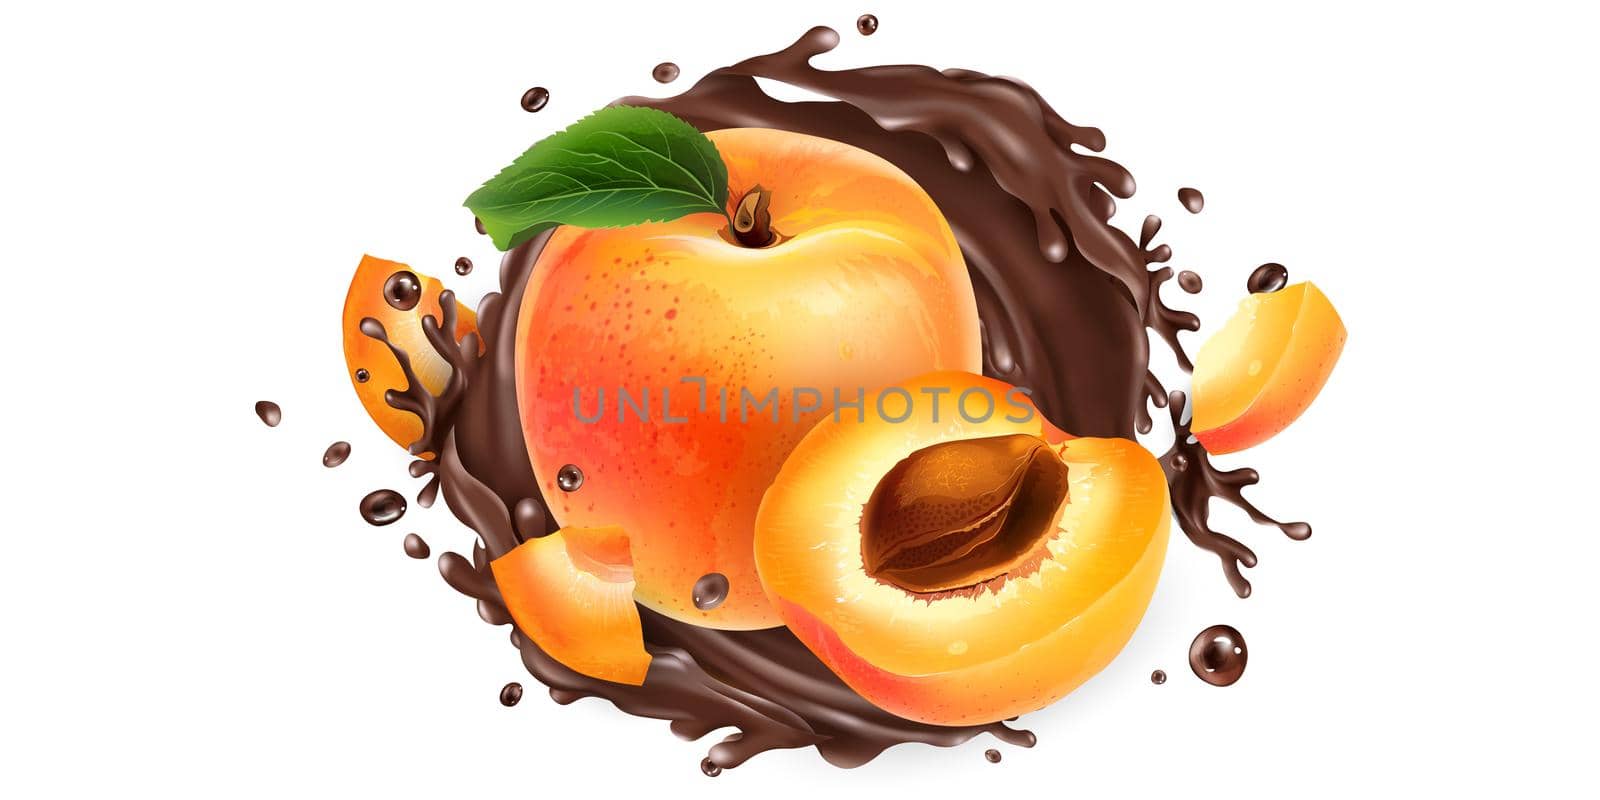 Ripe apricots and a splash of liquid chocolate on a white background. Realistic style illustration.